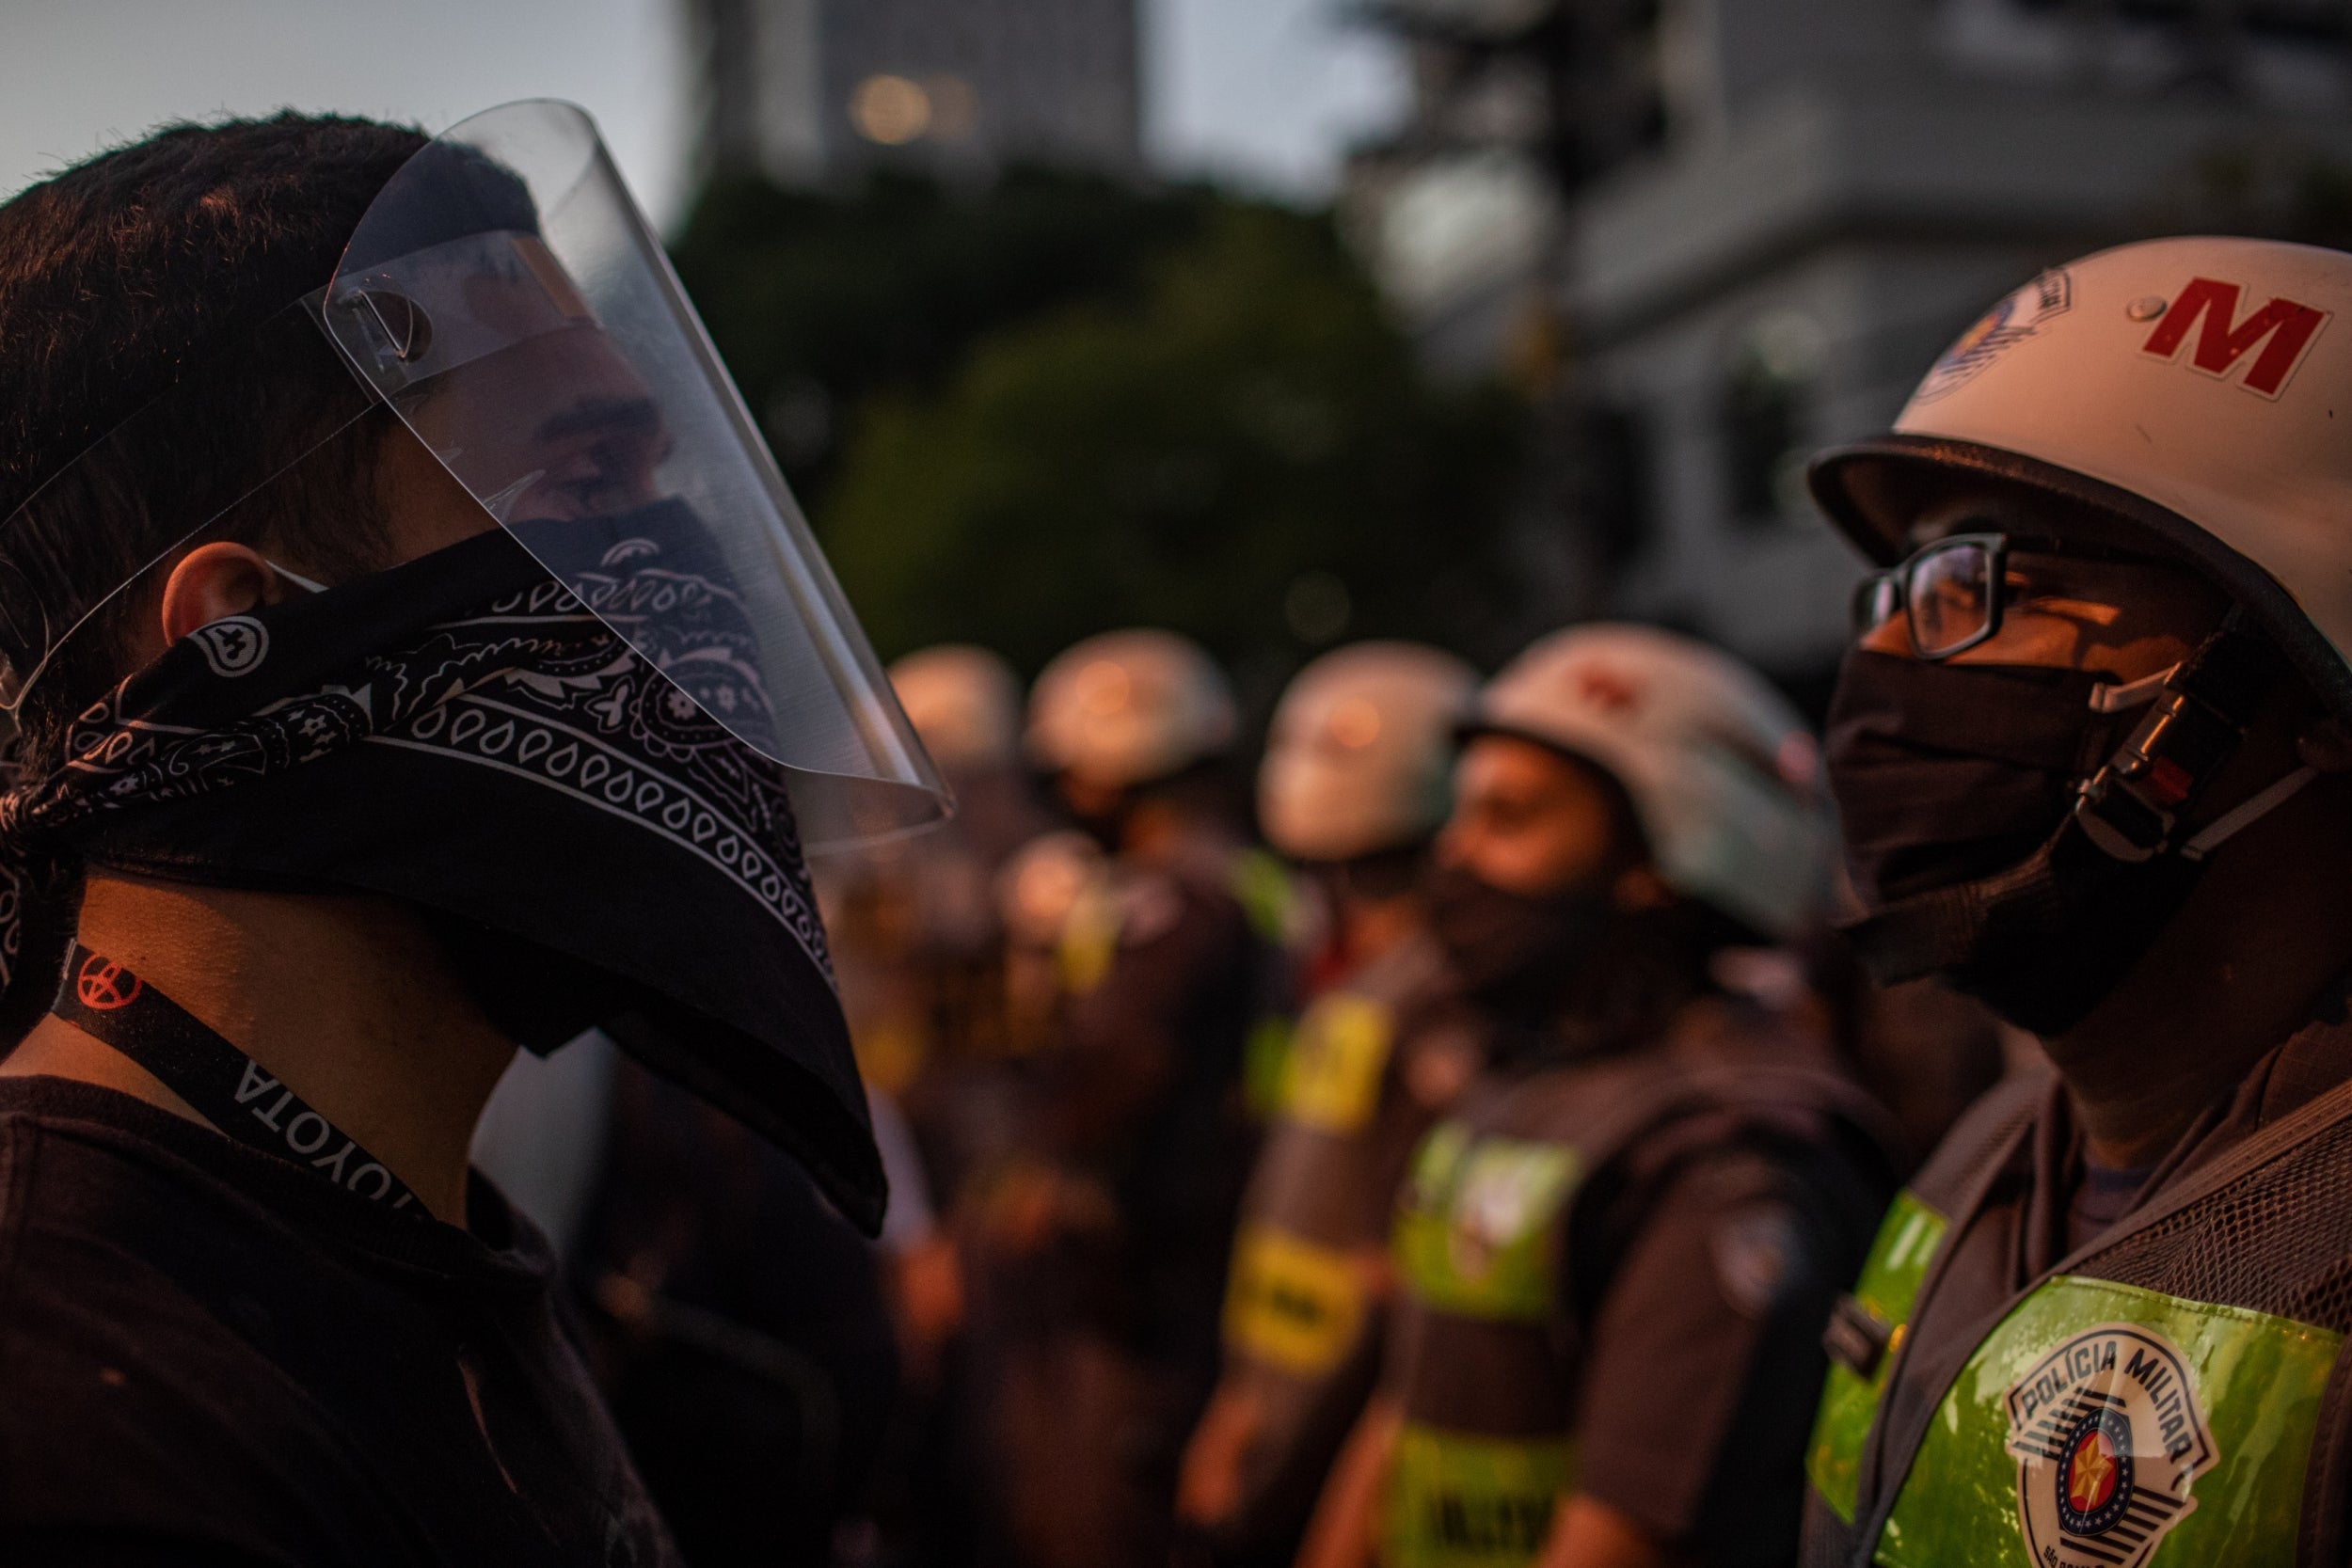 Pro-democracy protesters face off with military police during a protest against Bolsonaro